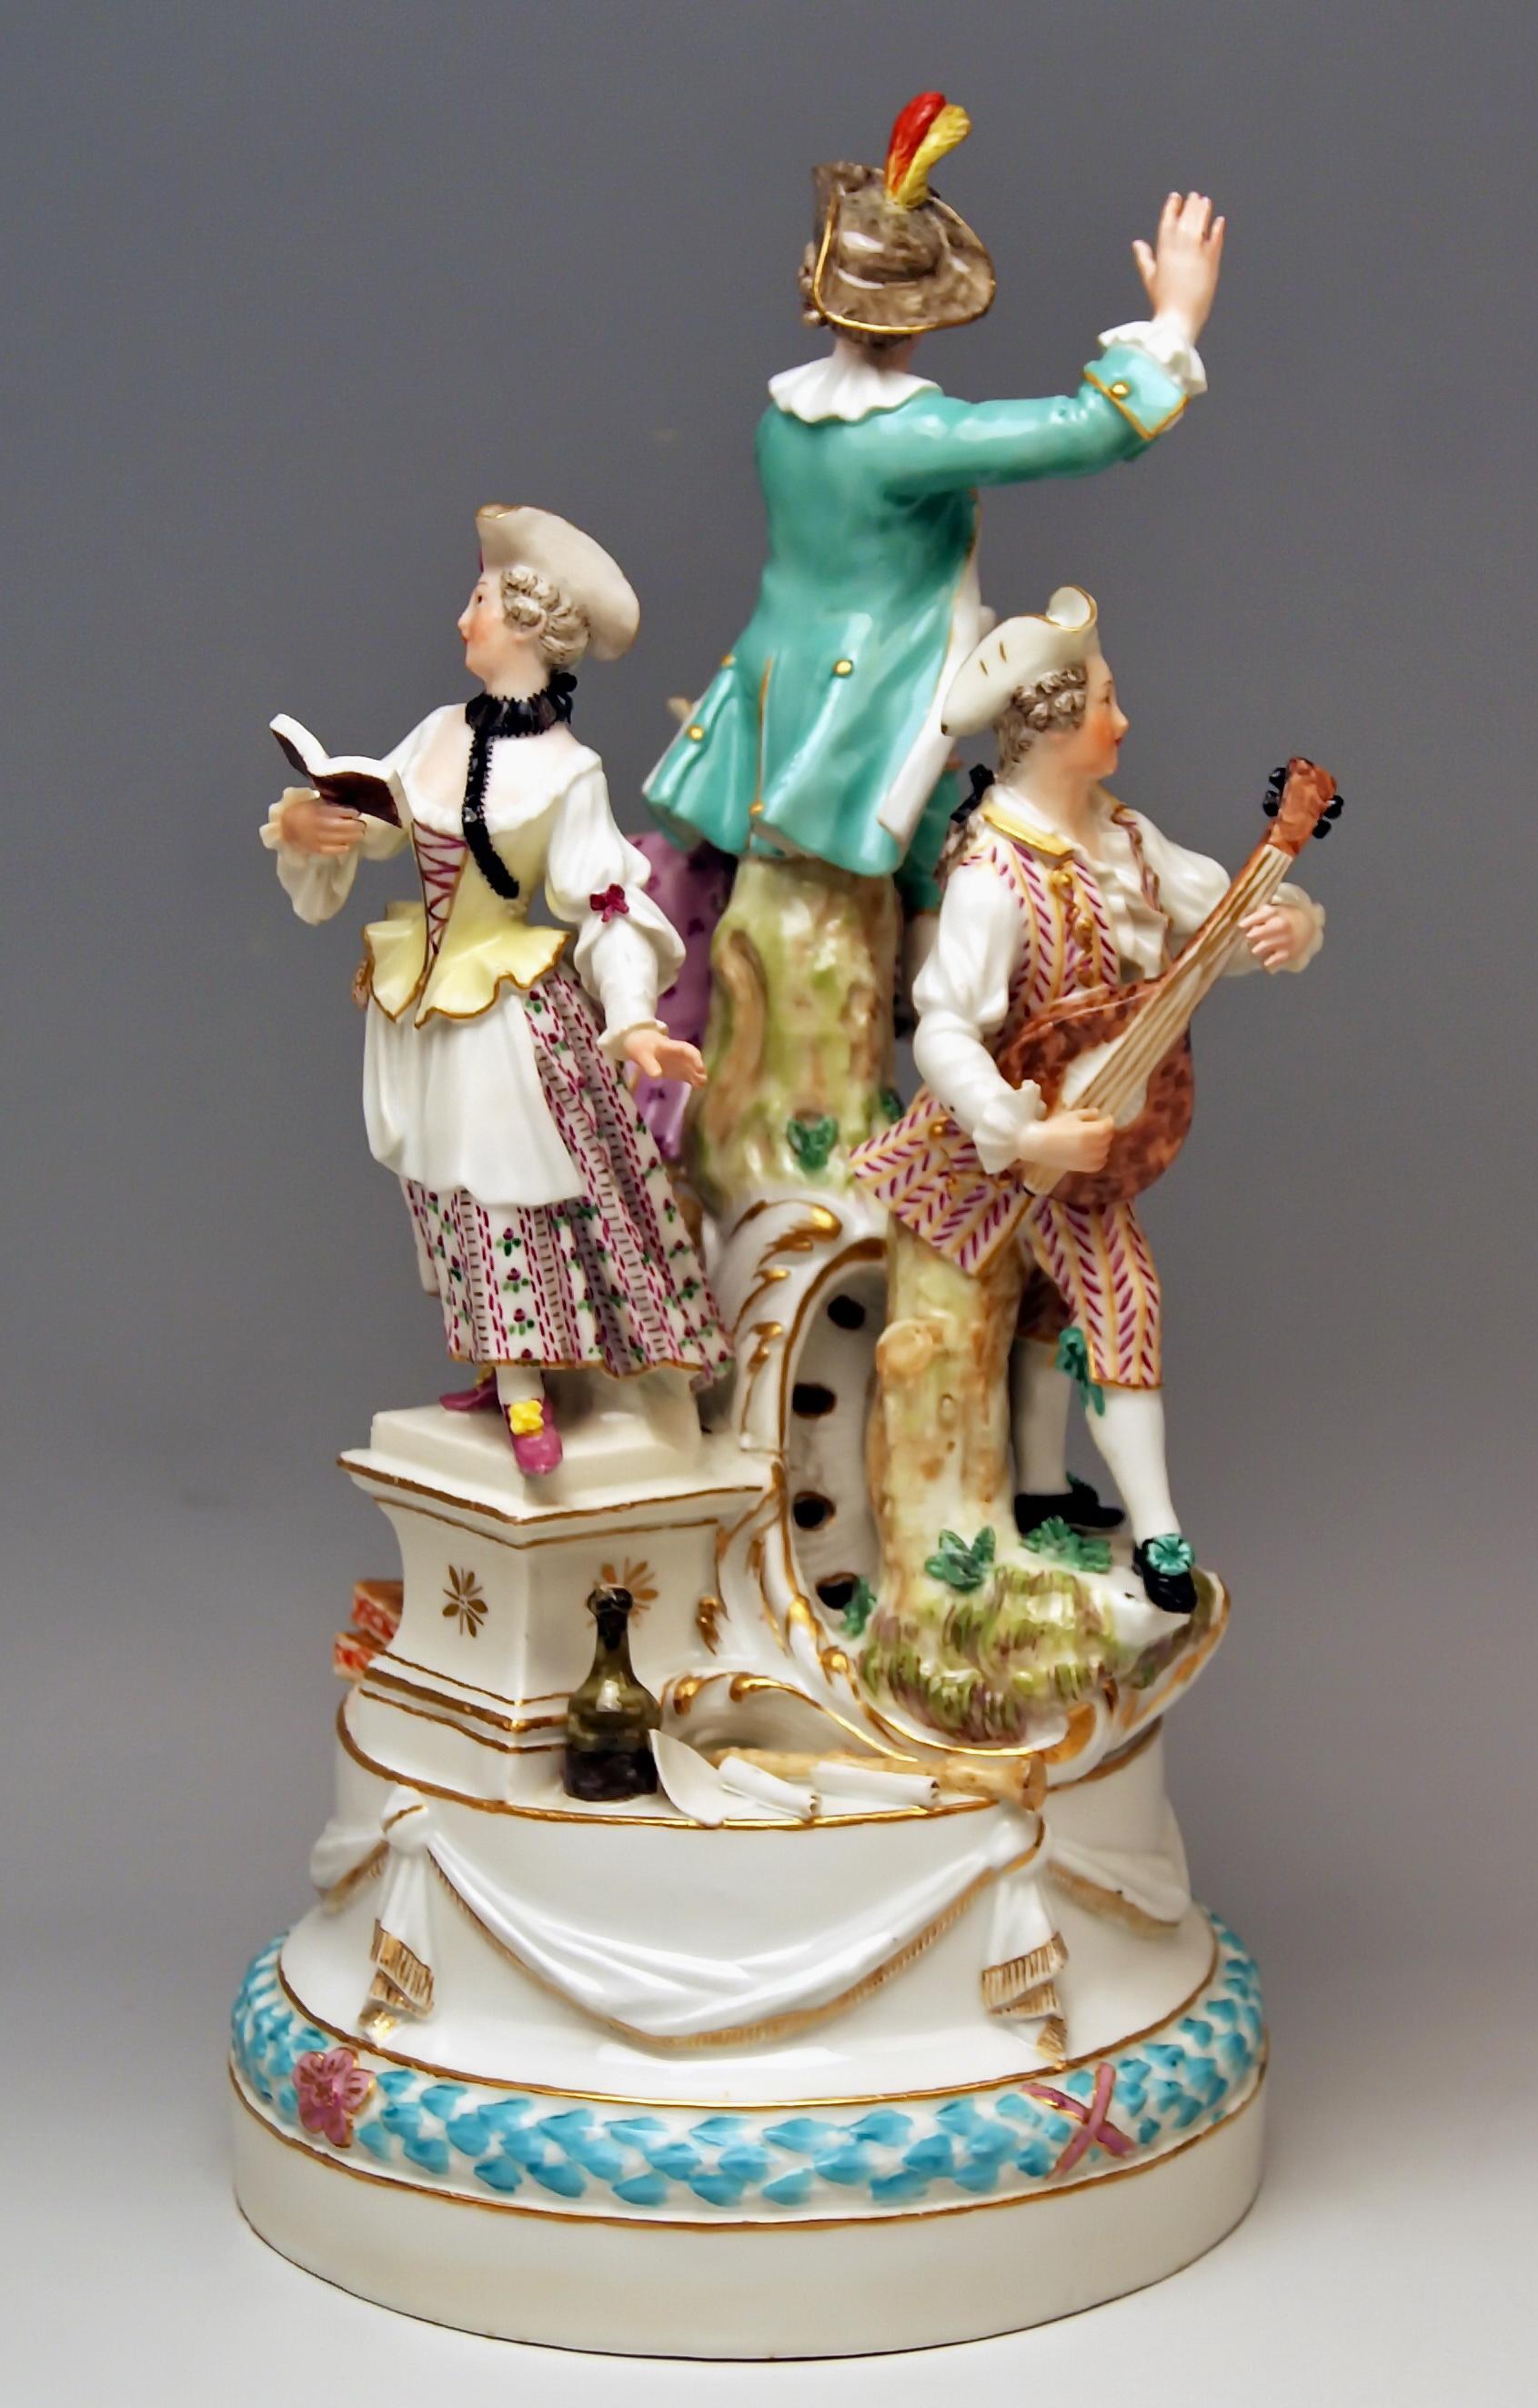 Meissen most lovely Figurines' group making music:
Made circa 1770 during Pre-Marcolini Period which means that it was manufactured before 1774 when the Meissen swords had a point at area below, between the hilts.

Size:
Height 11.81 inches (=